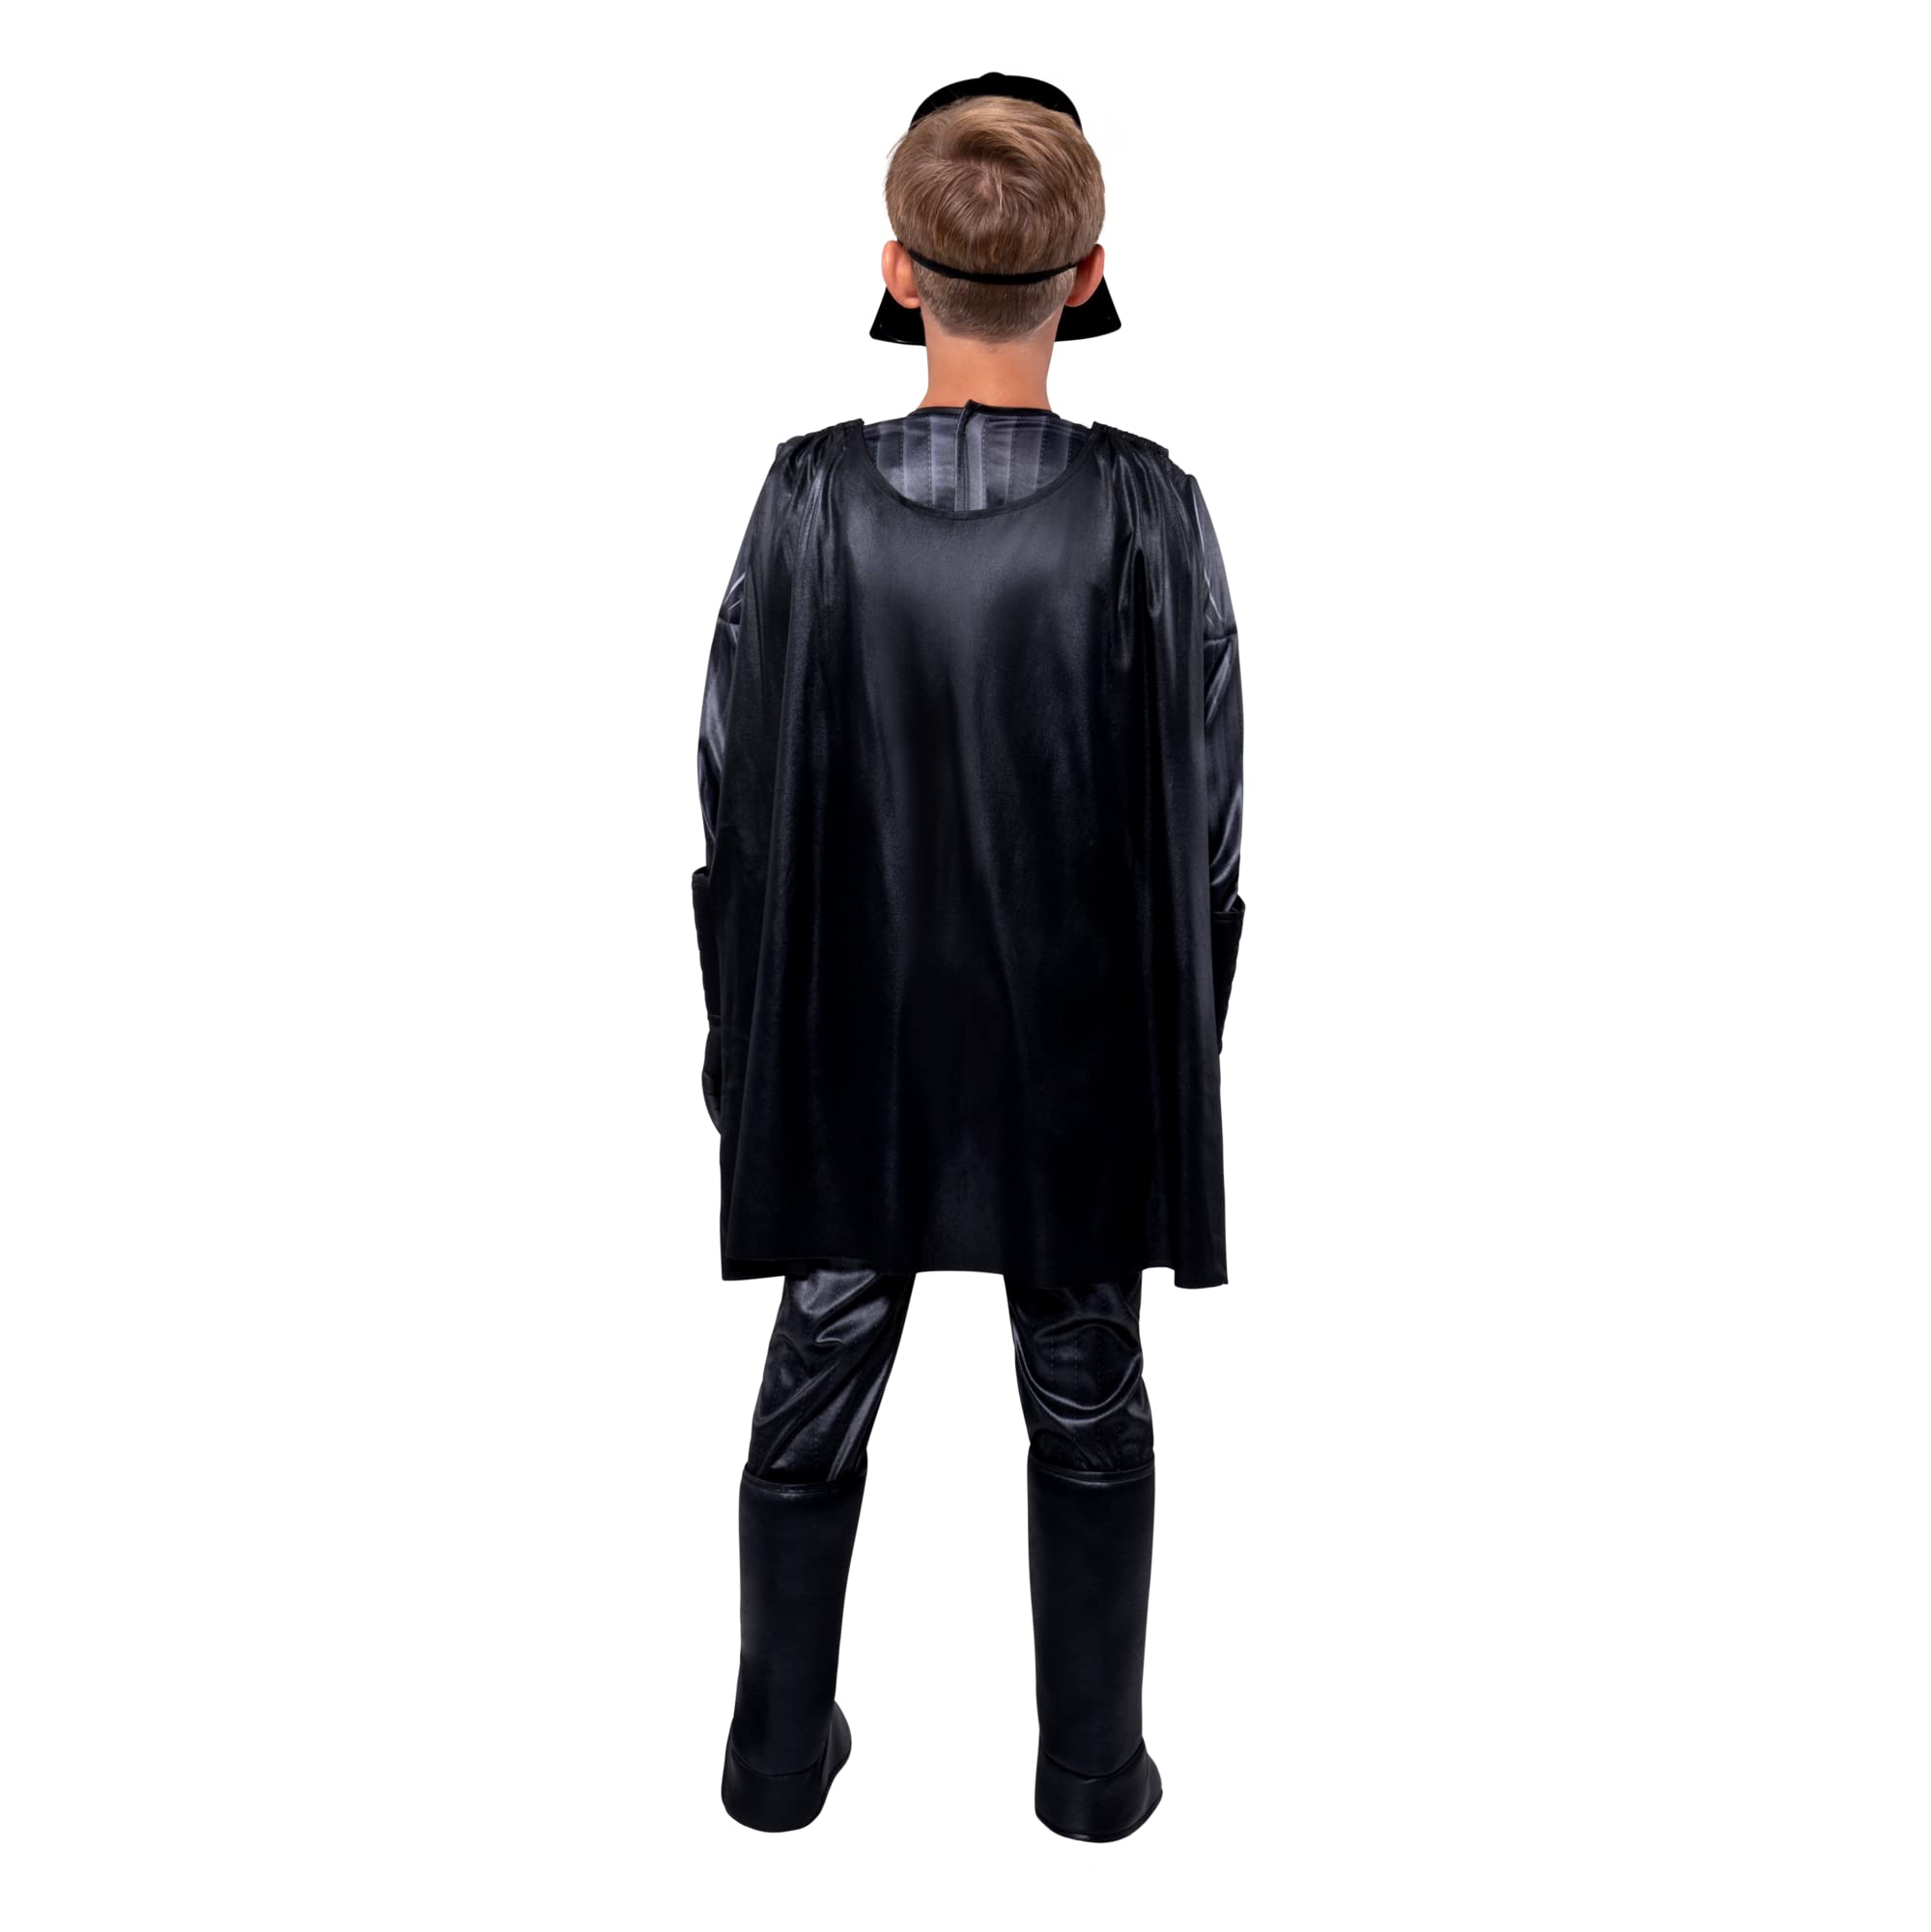 STAR WARS Darth Vader Deluxe Youth Costume-Deluxe